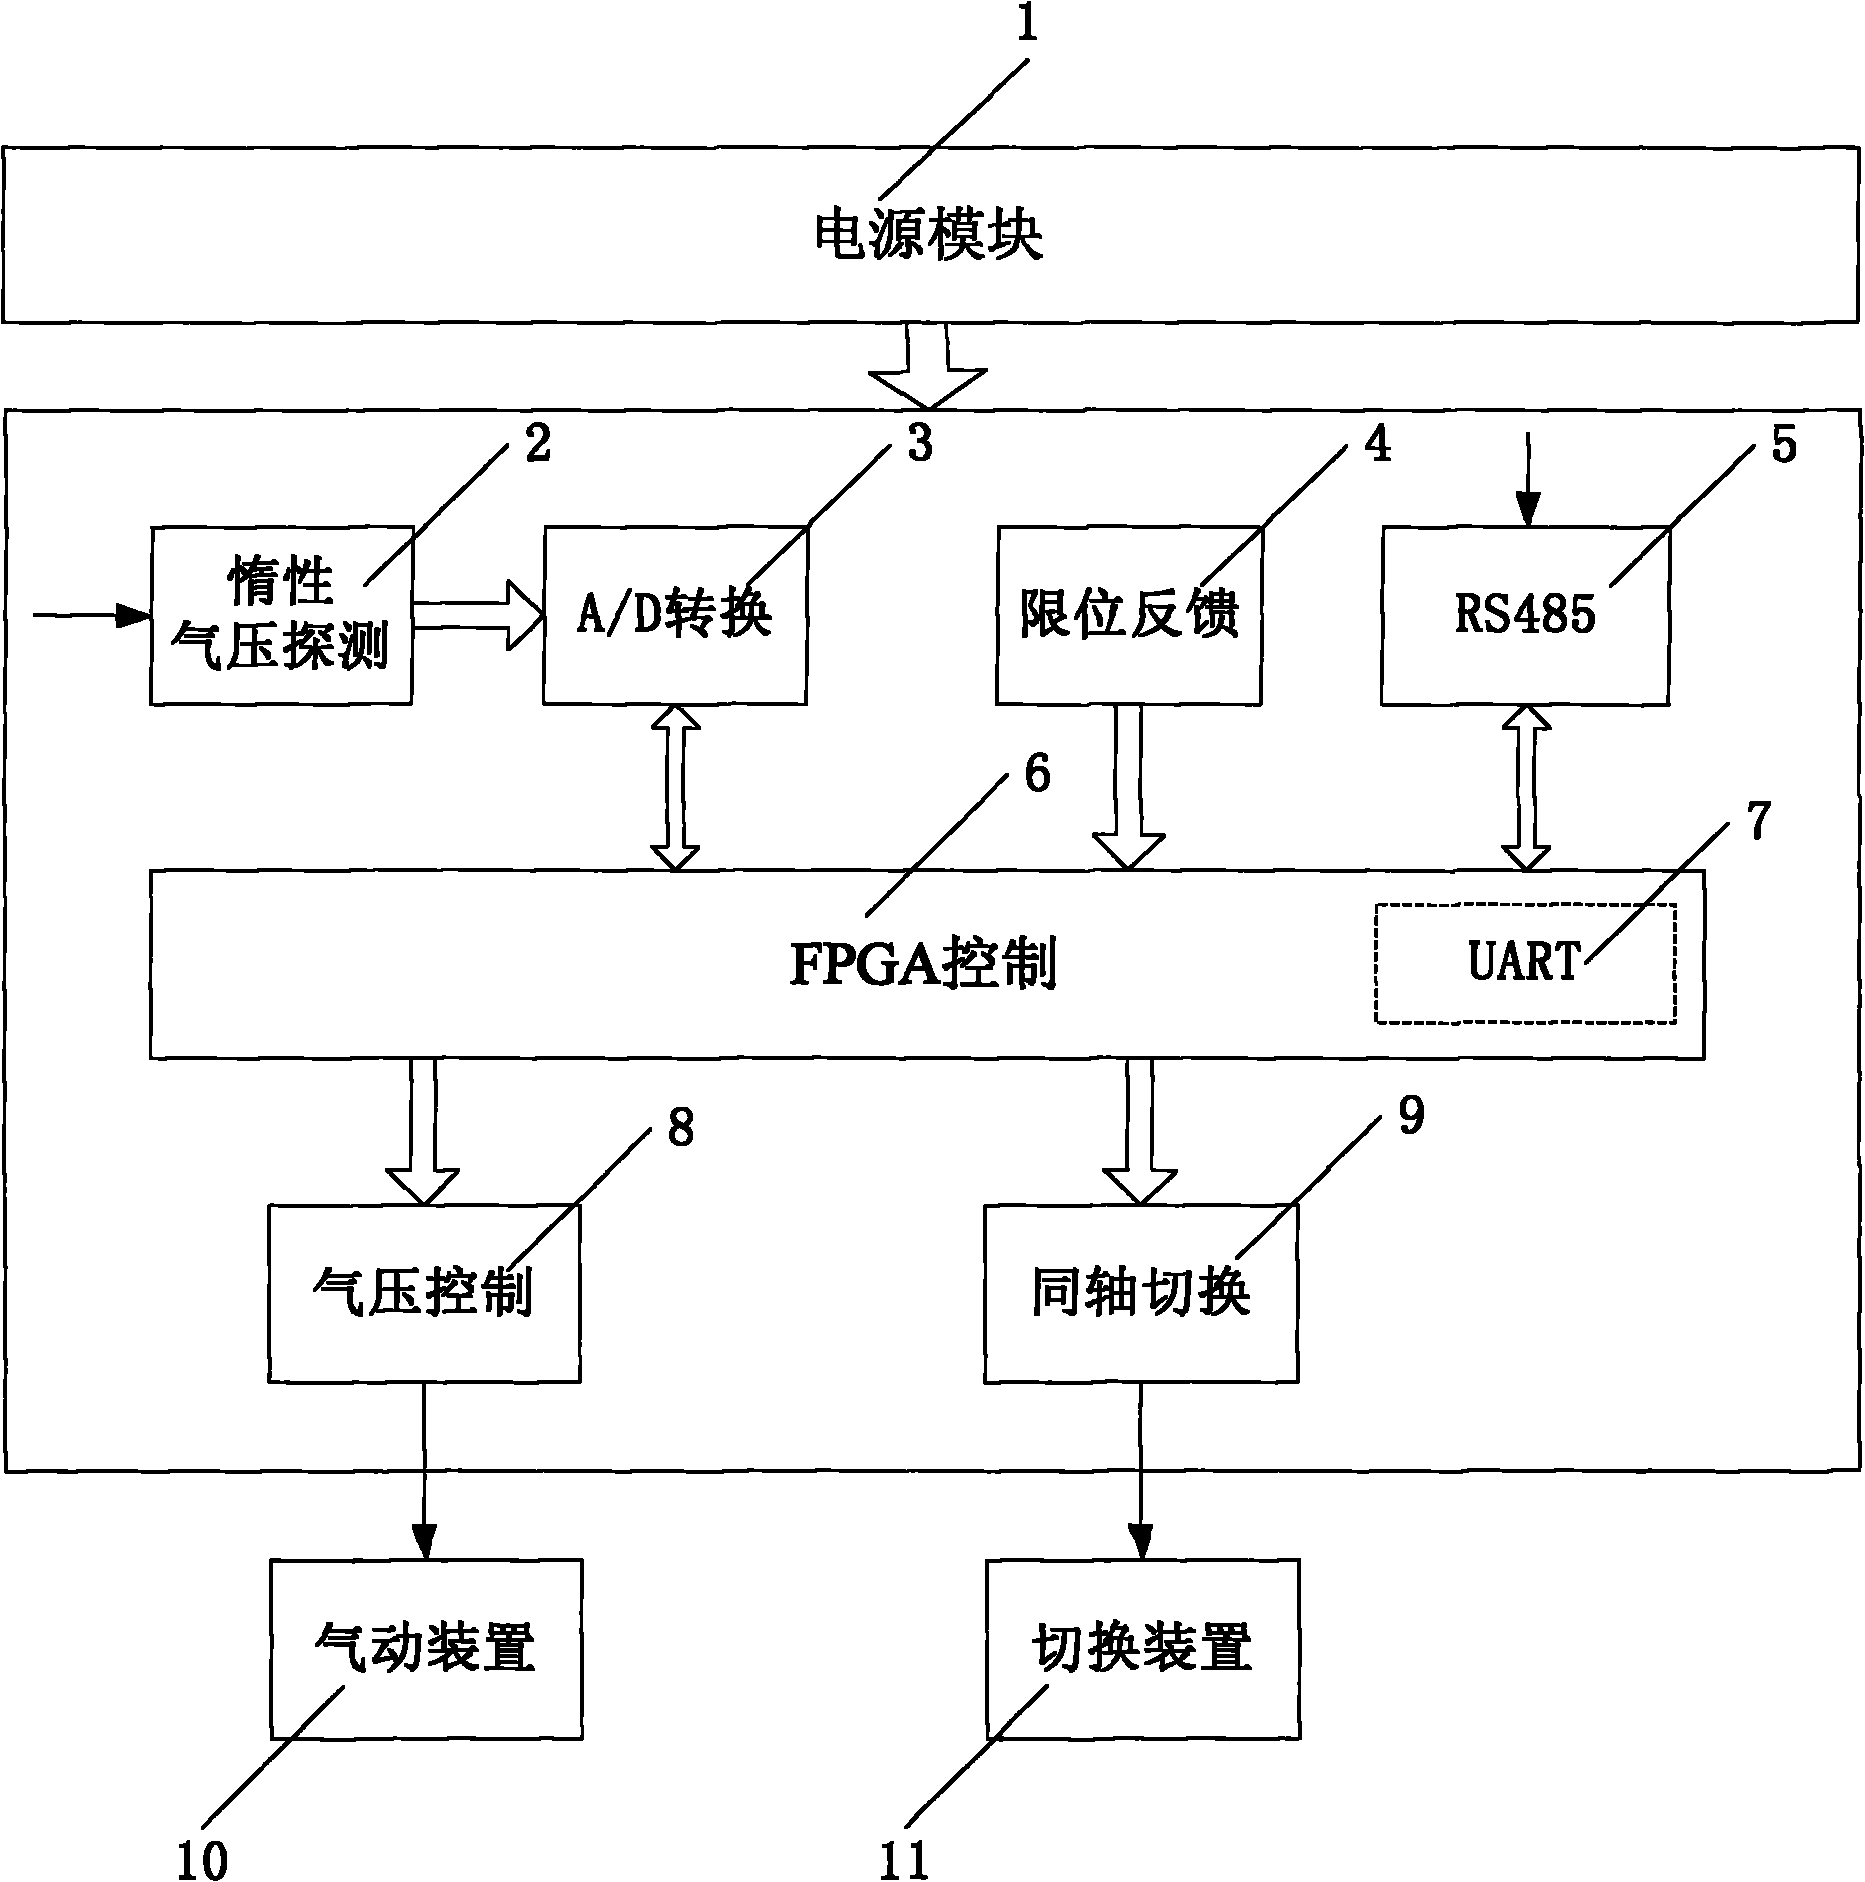 Coaxial switching remote monitor based on FPGA